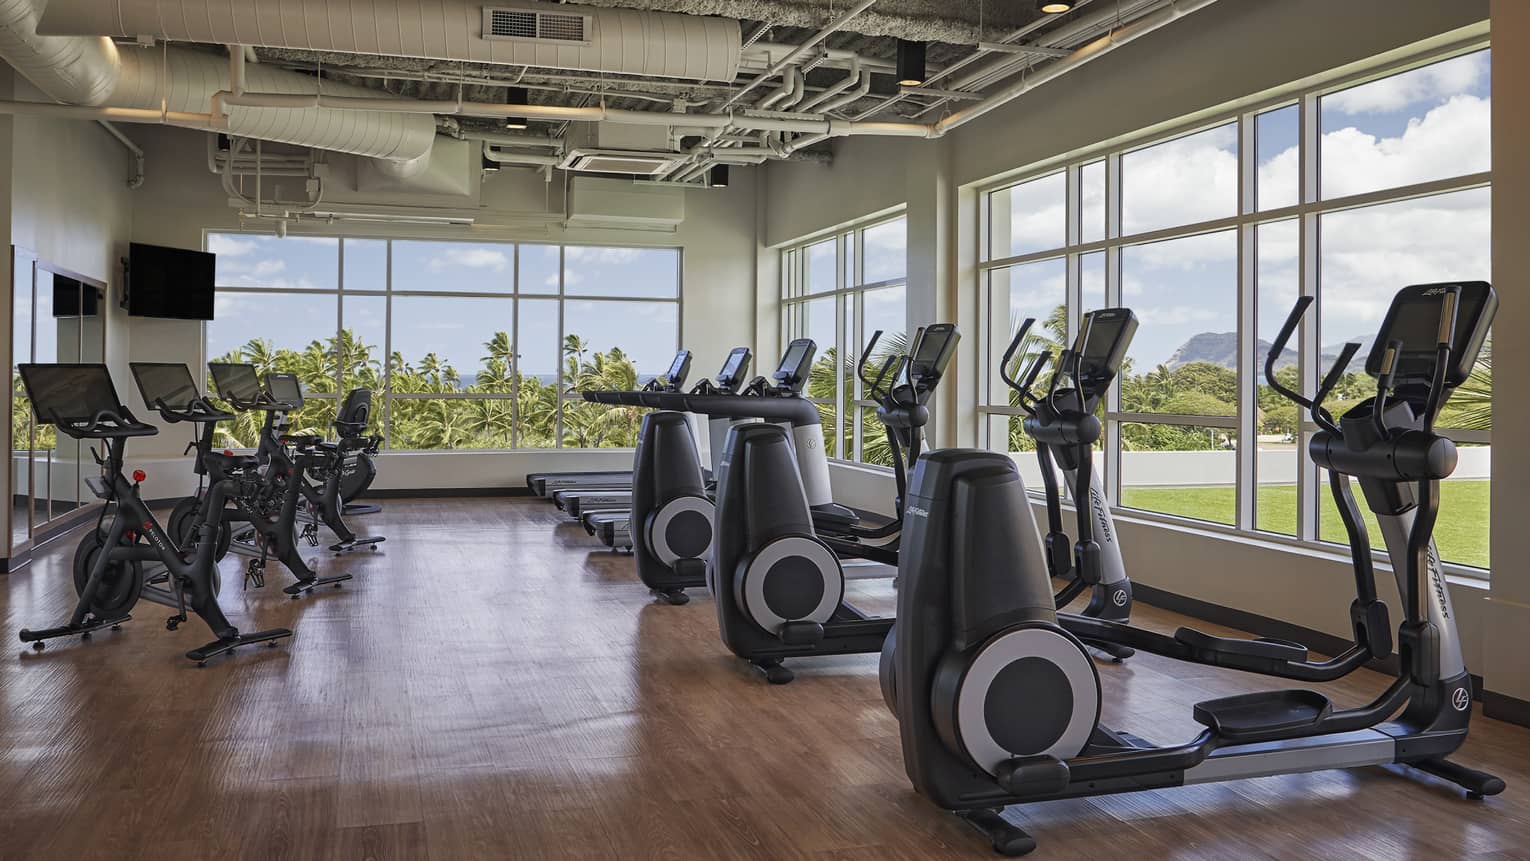 Ellipticals, treadmills and stationary bicycles are lined up next to large windows in the gym